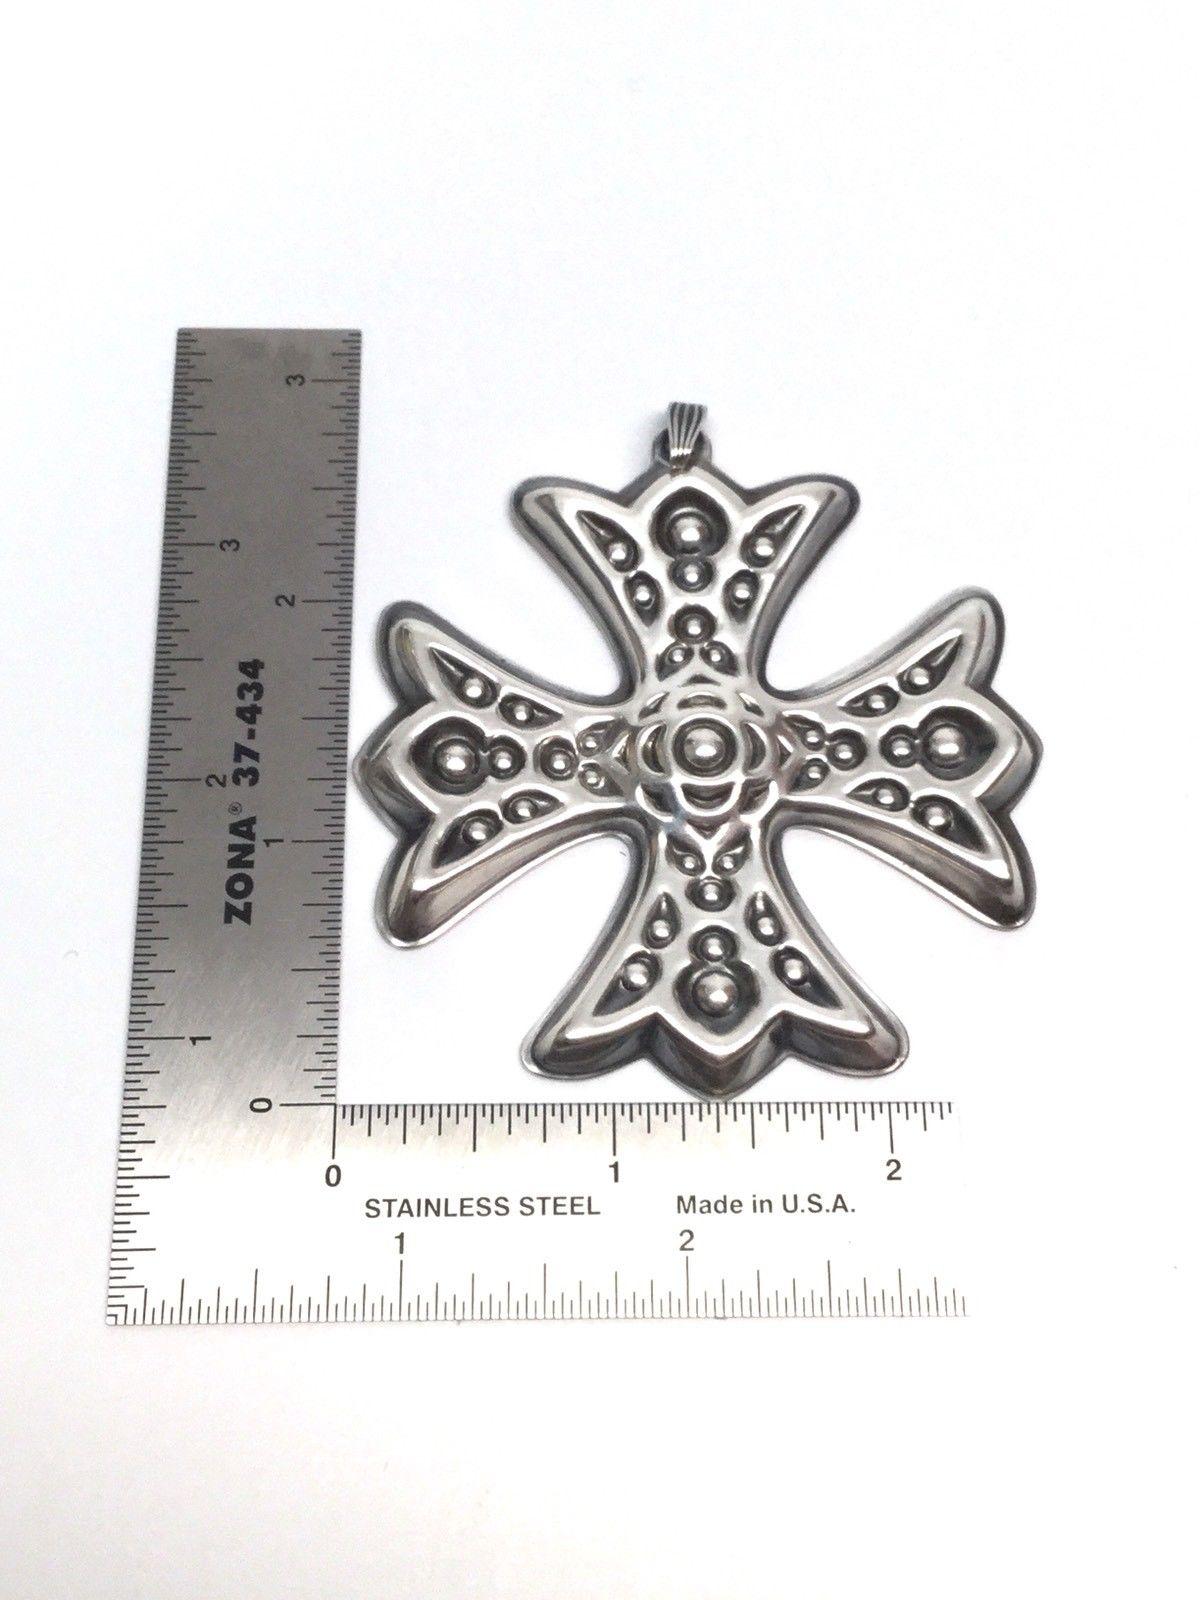 1975 Reed & Barton sterling silver Christmas cross ornament. 
This is a lovely 1975 sterling silver Christmas cross ornament by Reed & Barton. 
Measurement: Approximate 2 3/4 inches length x 2 11/16 inches wide. 
Weight: 20.2 g / 13.0 dwt.